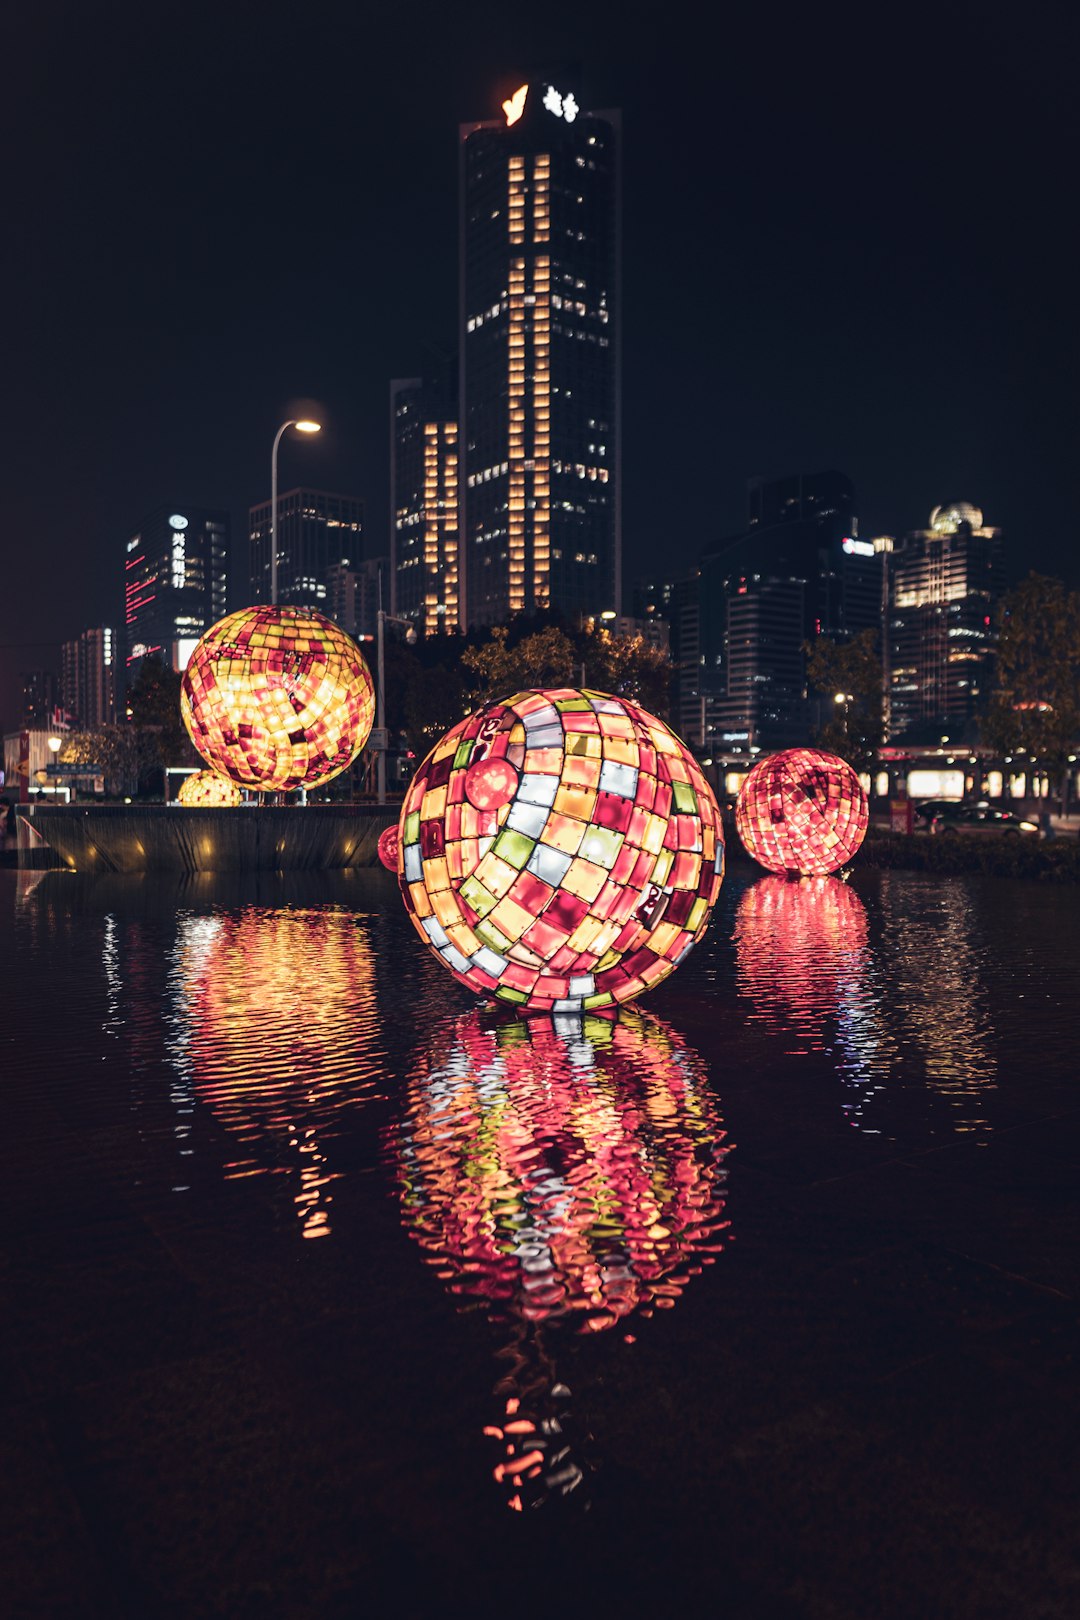 decorative balls with lights floating on body of water at the city during nighttime